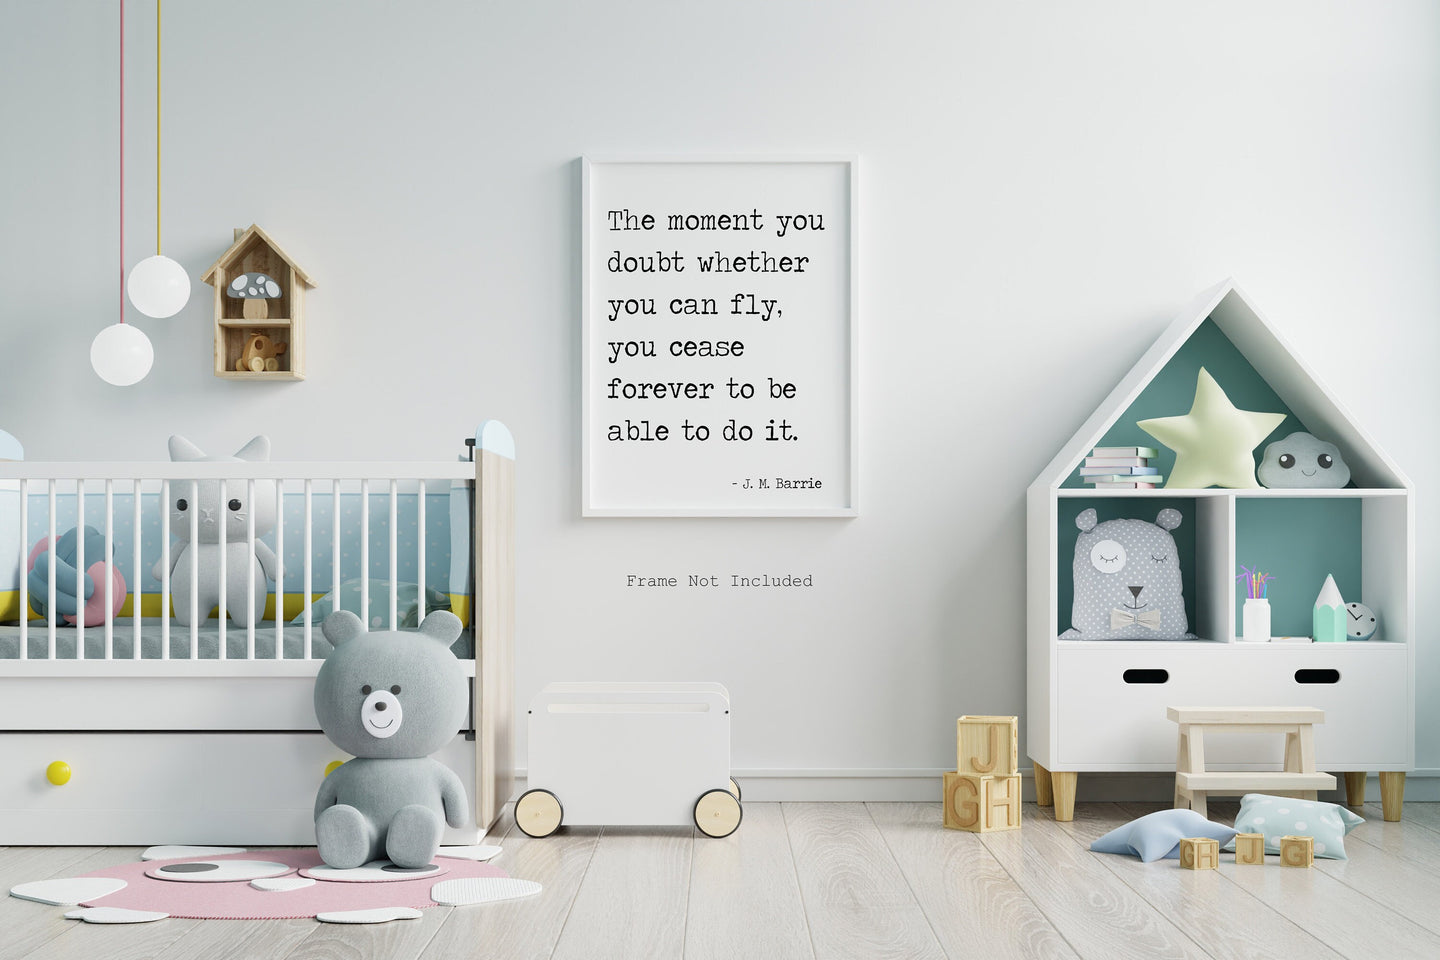 Peter Pan Quote - The moment you doubt whether you can fly you cease forever to be able to do it - Print for little girl's Bedroom decor